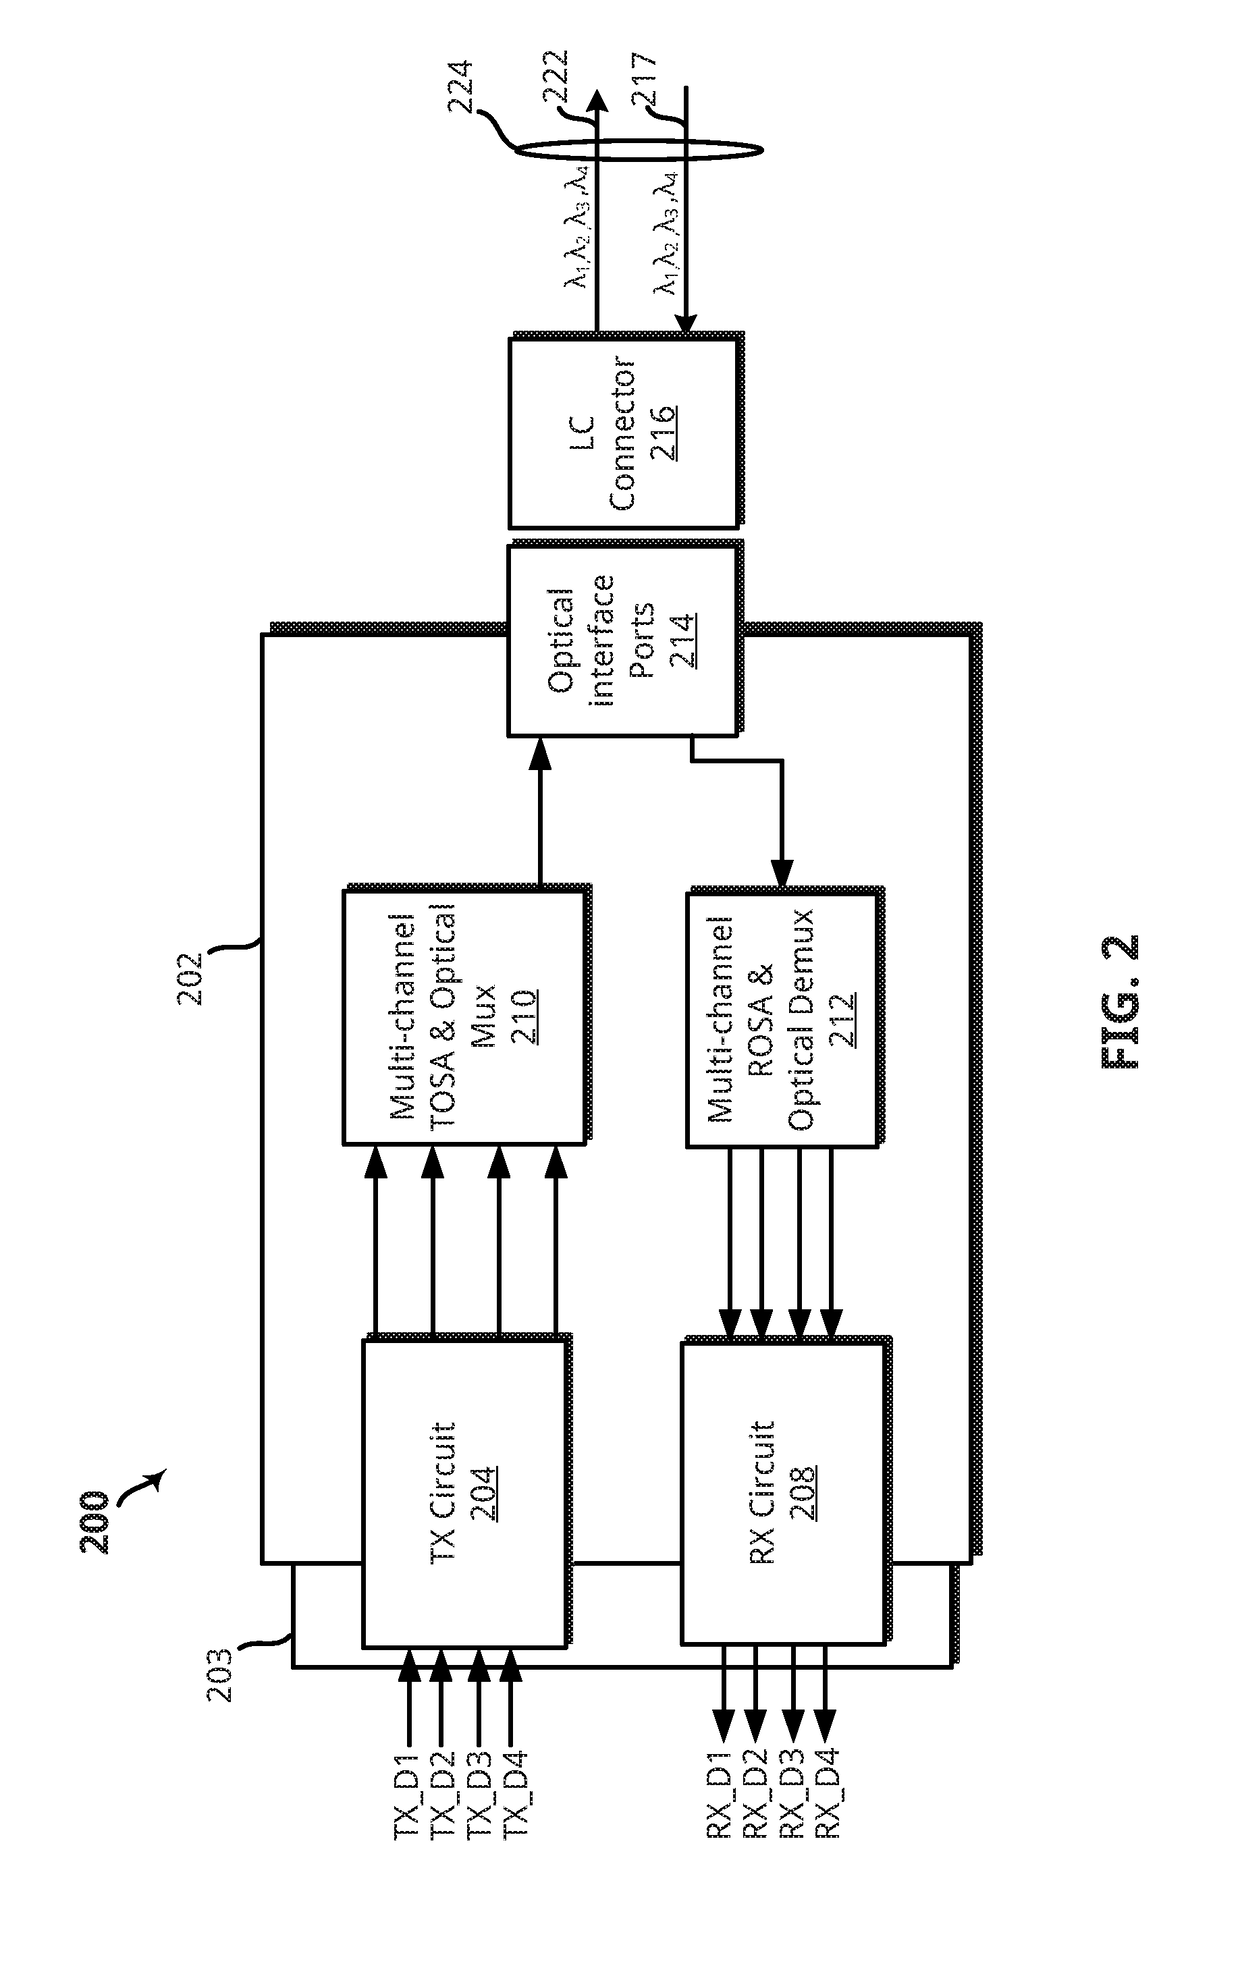 Techniques for reducing electrical interconnection losses between a transmitter optical subassembly (TOSA) and associated driver circuitry and an optical transceiver system using the same